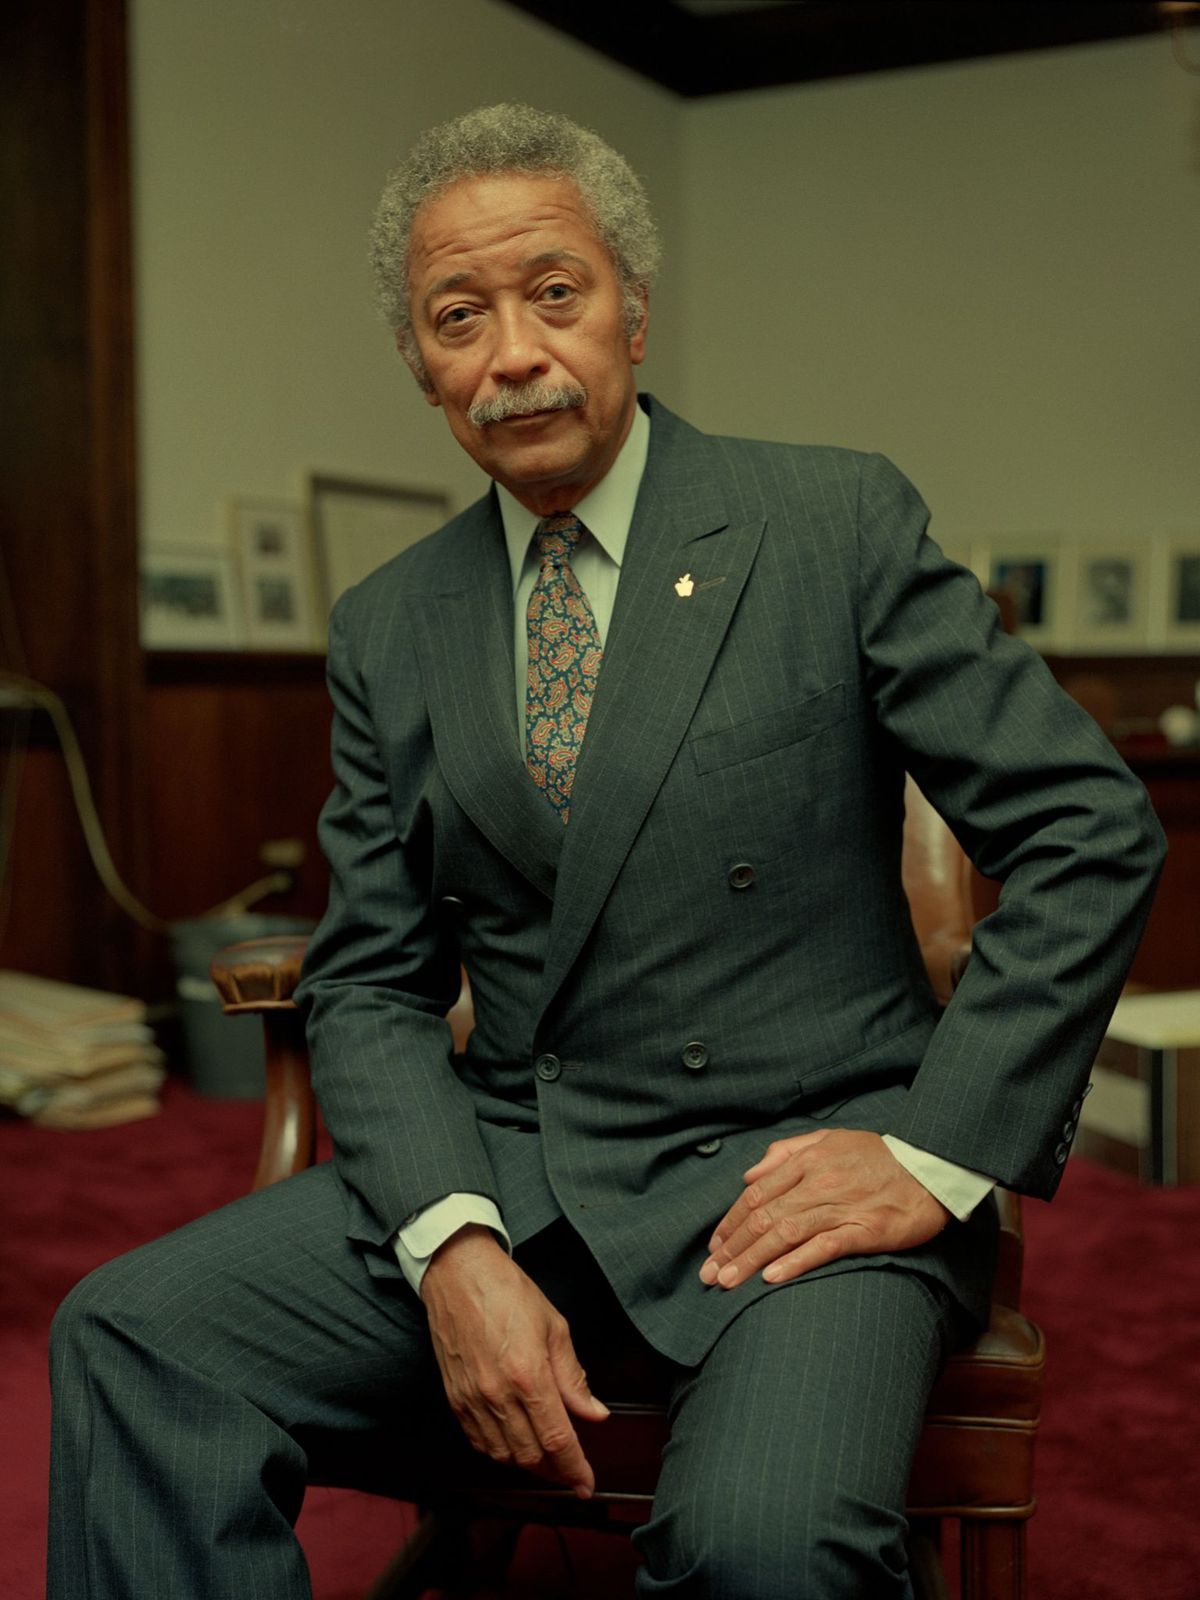 David N. Dinkins poses for a portrait in his office in November 1986 in New York City, New York | Photo: Karjean Levine/Getty Images